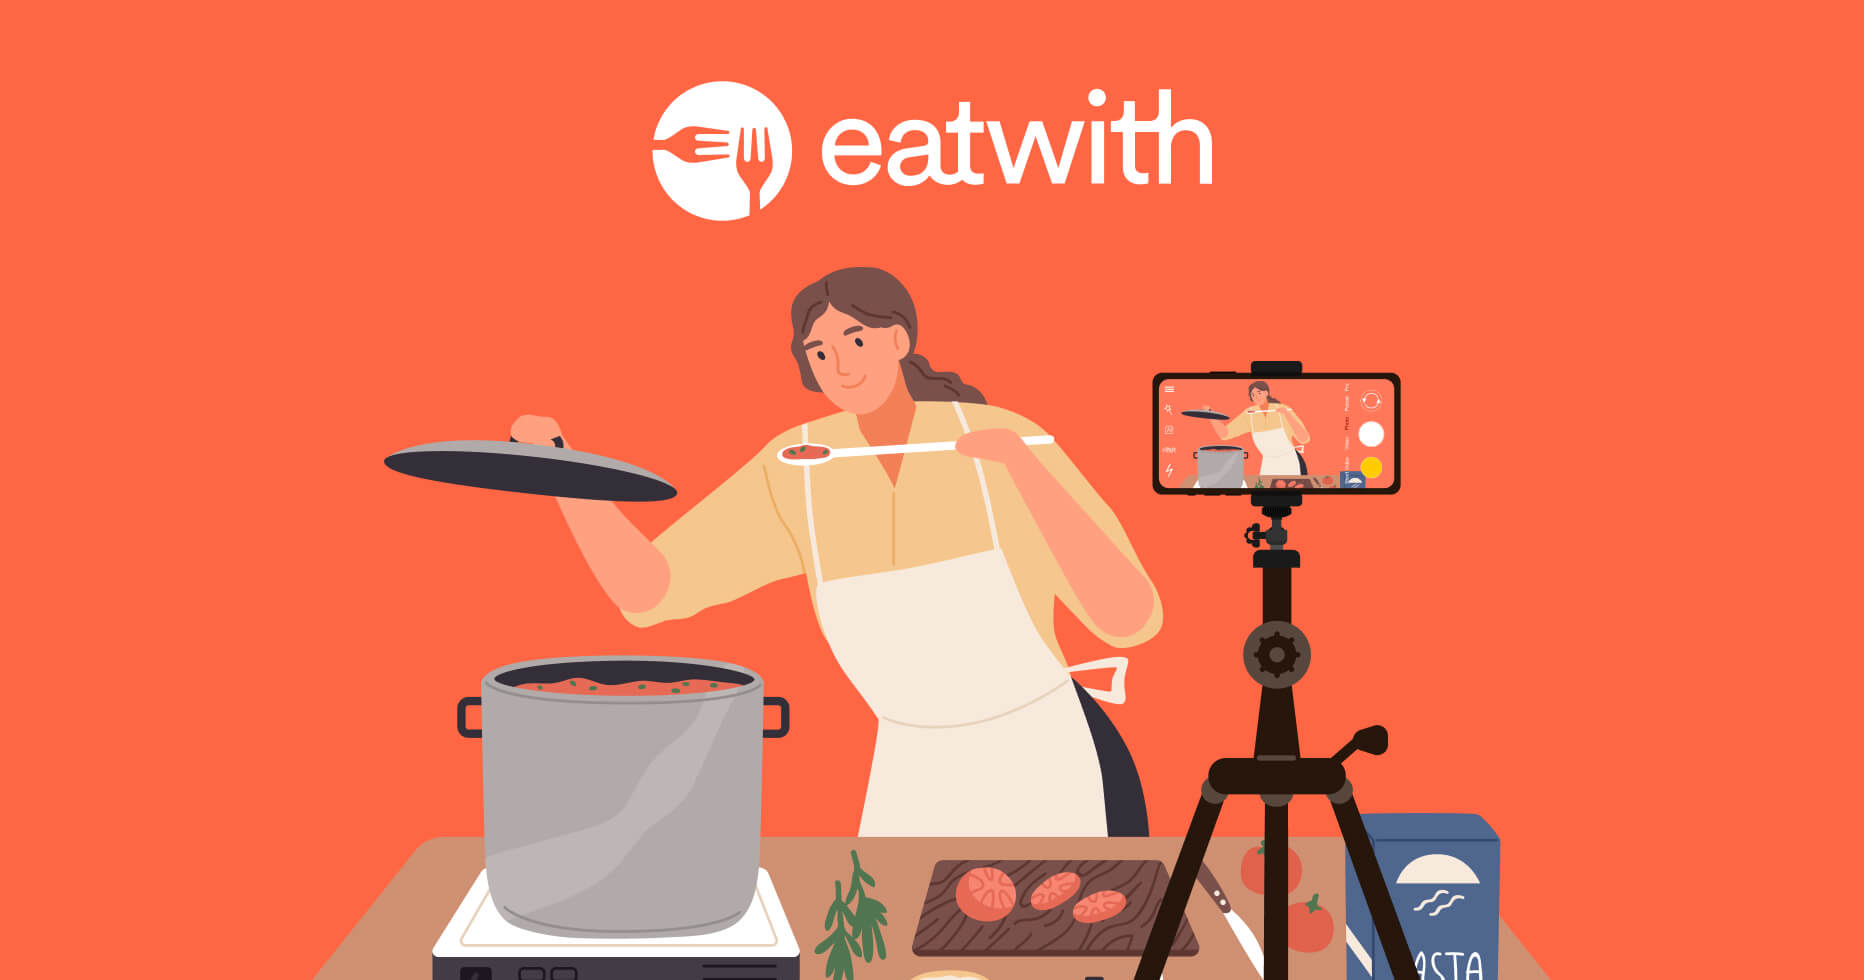 Earn on online culinary experiences with Eatwith